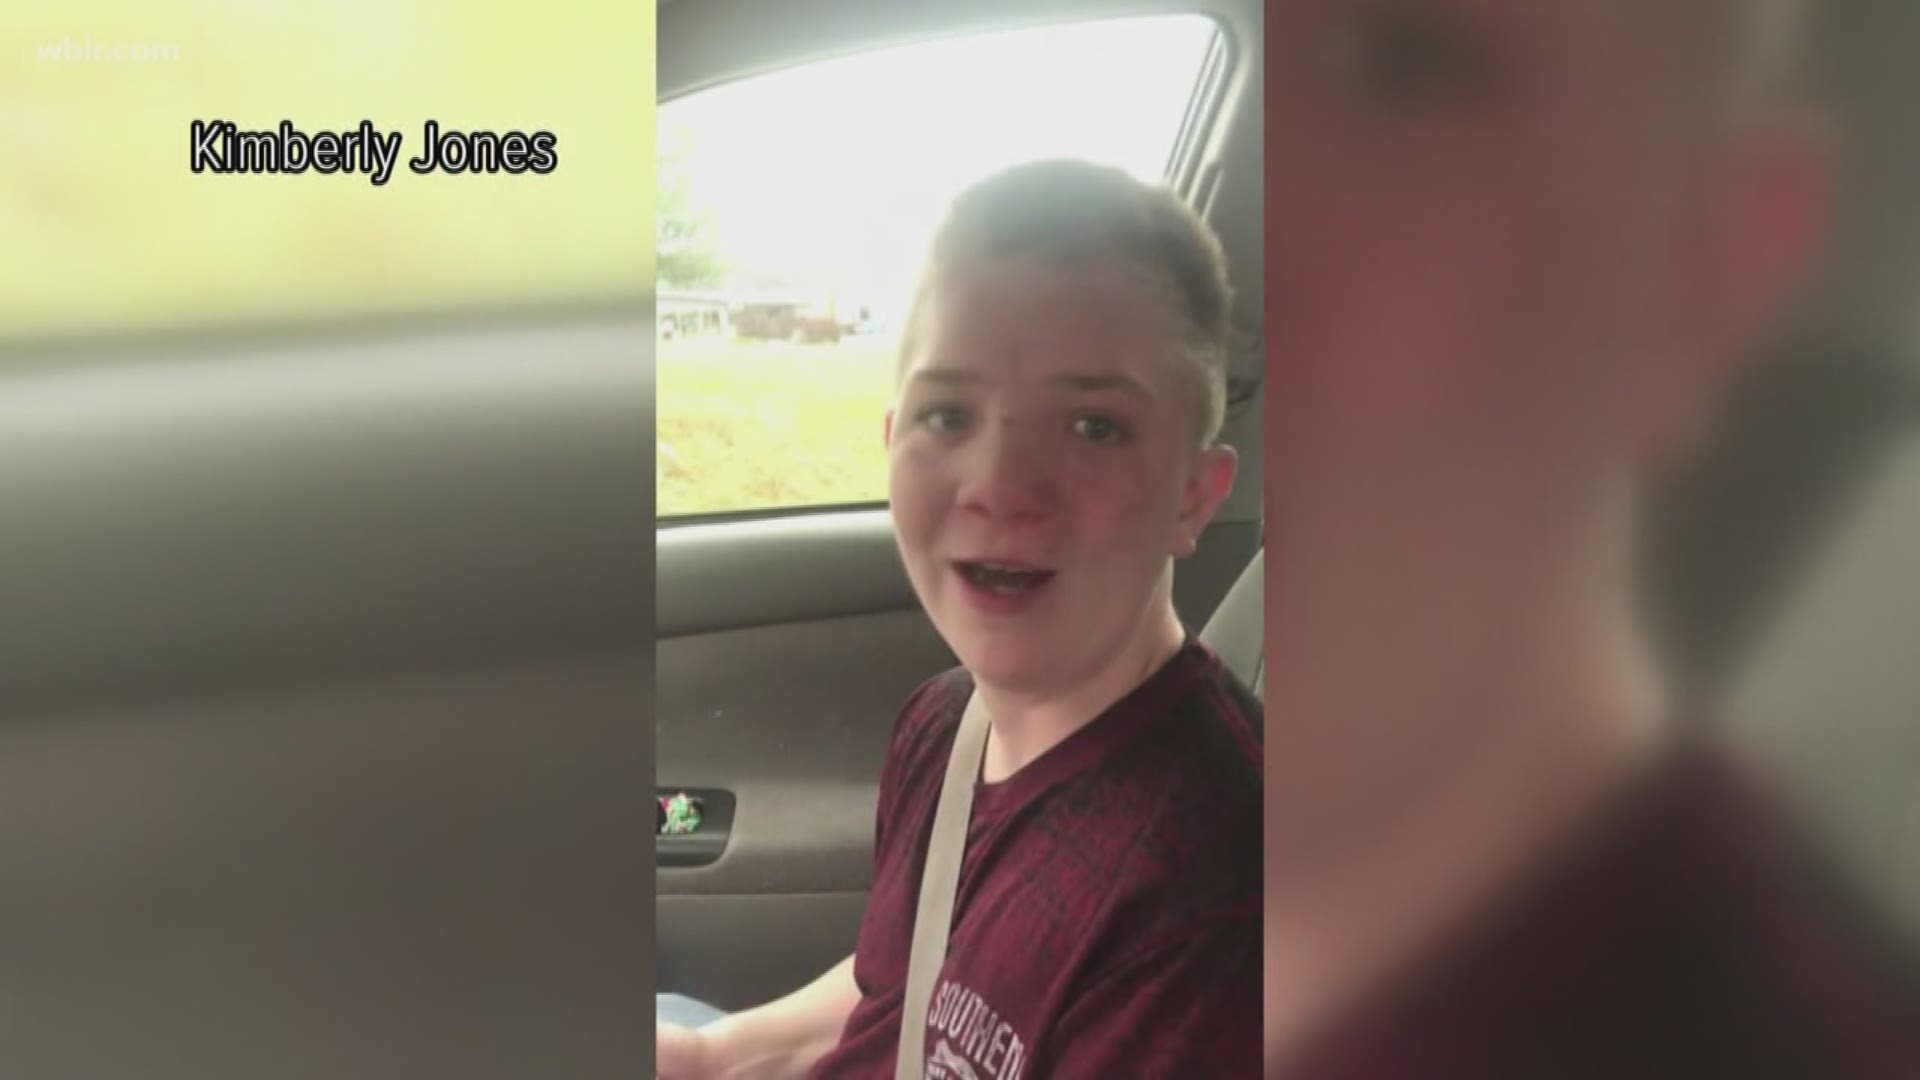 After his post about being bullied went viral, the East Tennessee boy was welcomed by his new friends at the University of Tennessee.